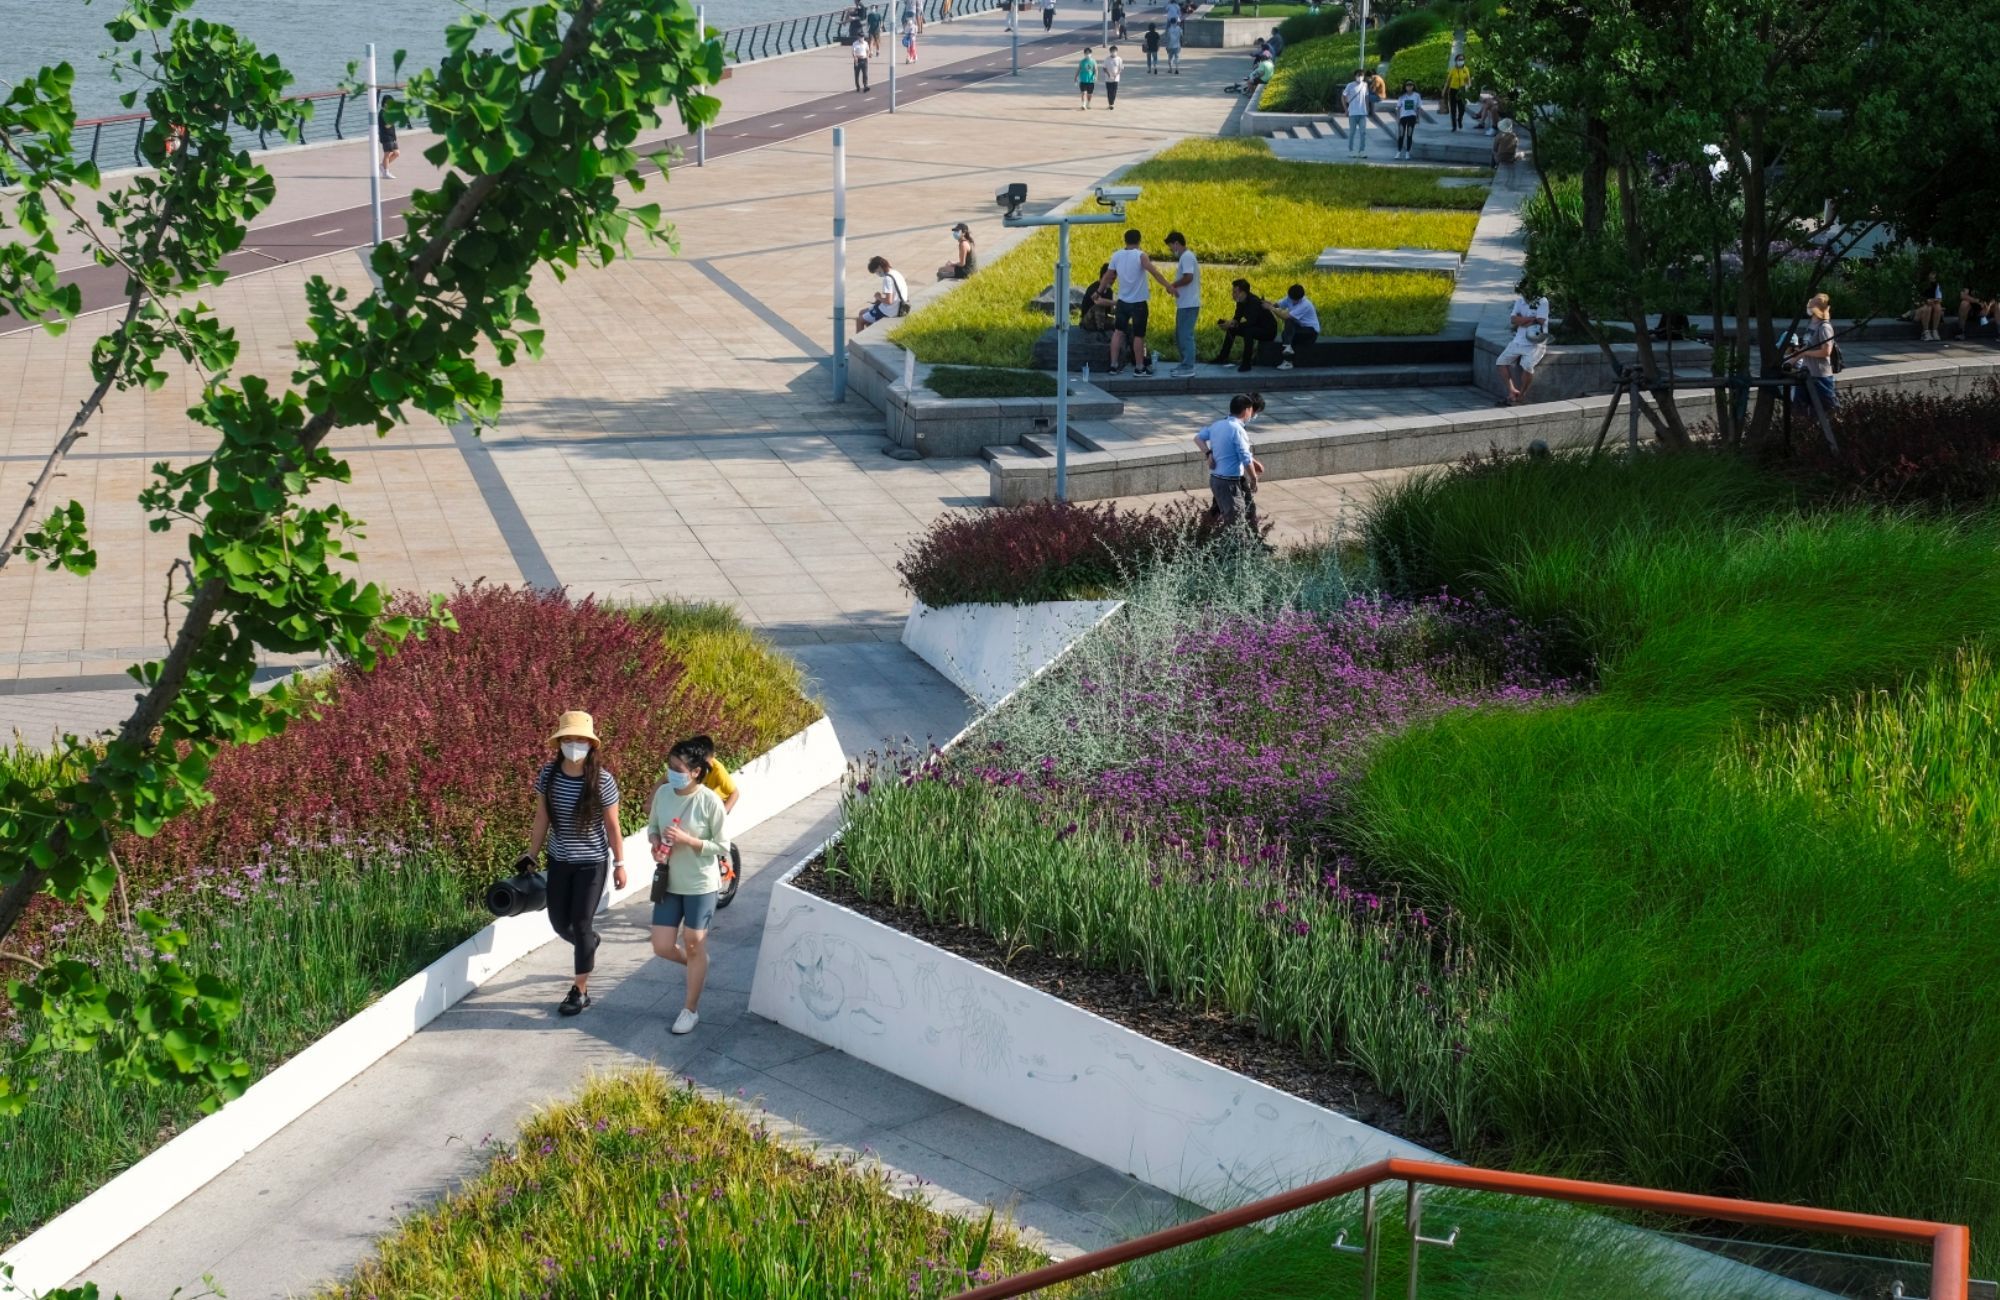 A HASSELL landscape project showing a landscaped public space by the water